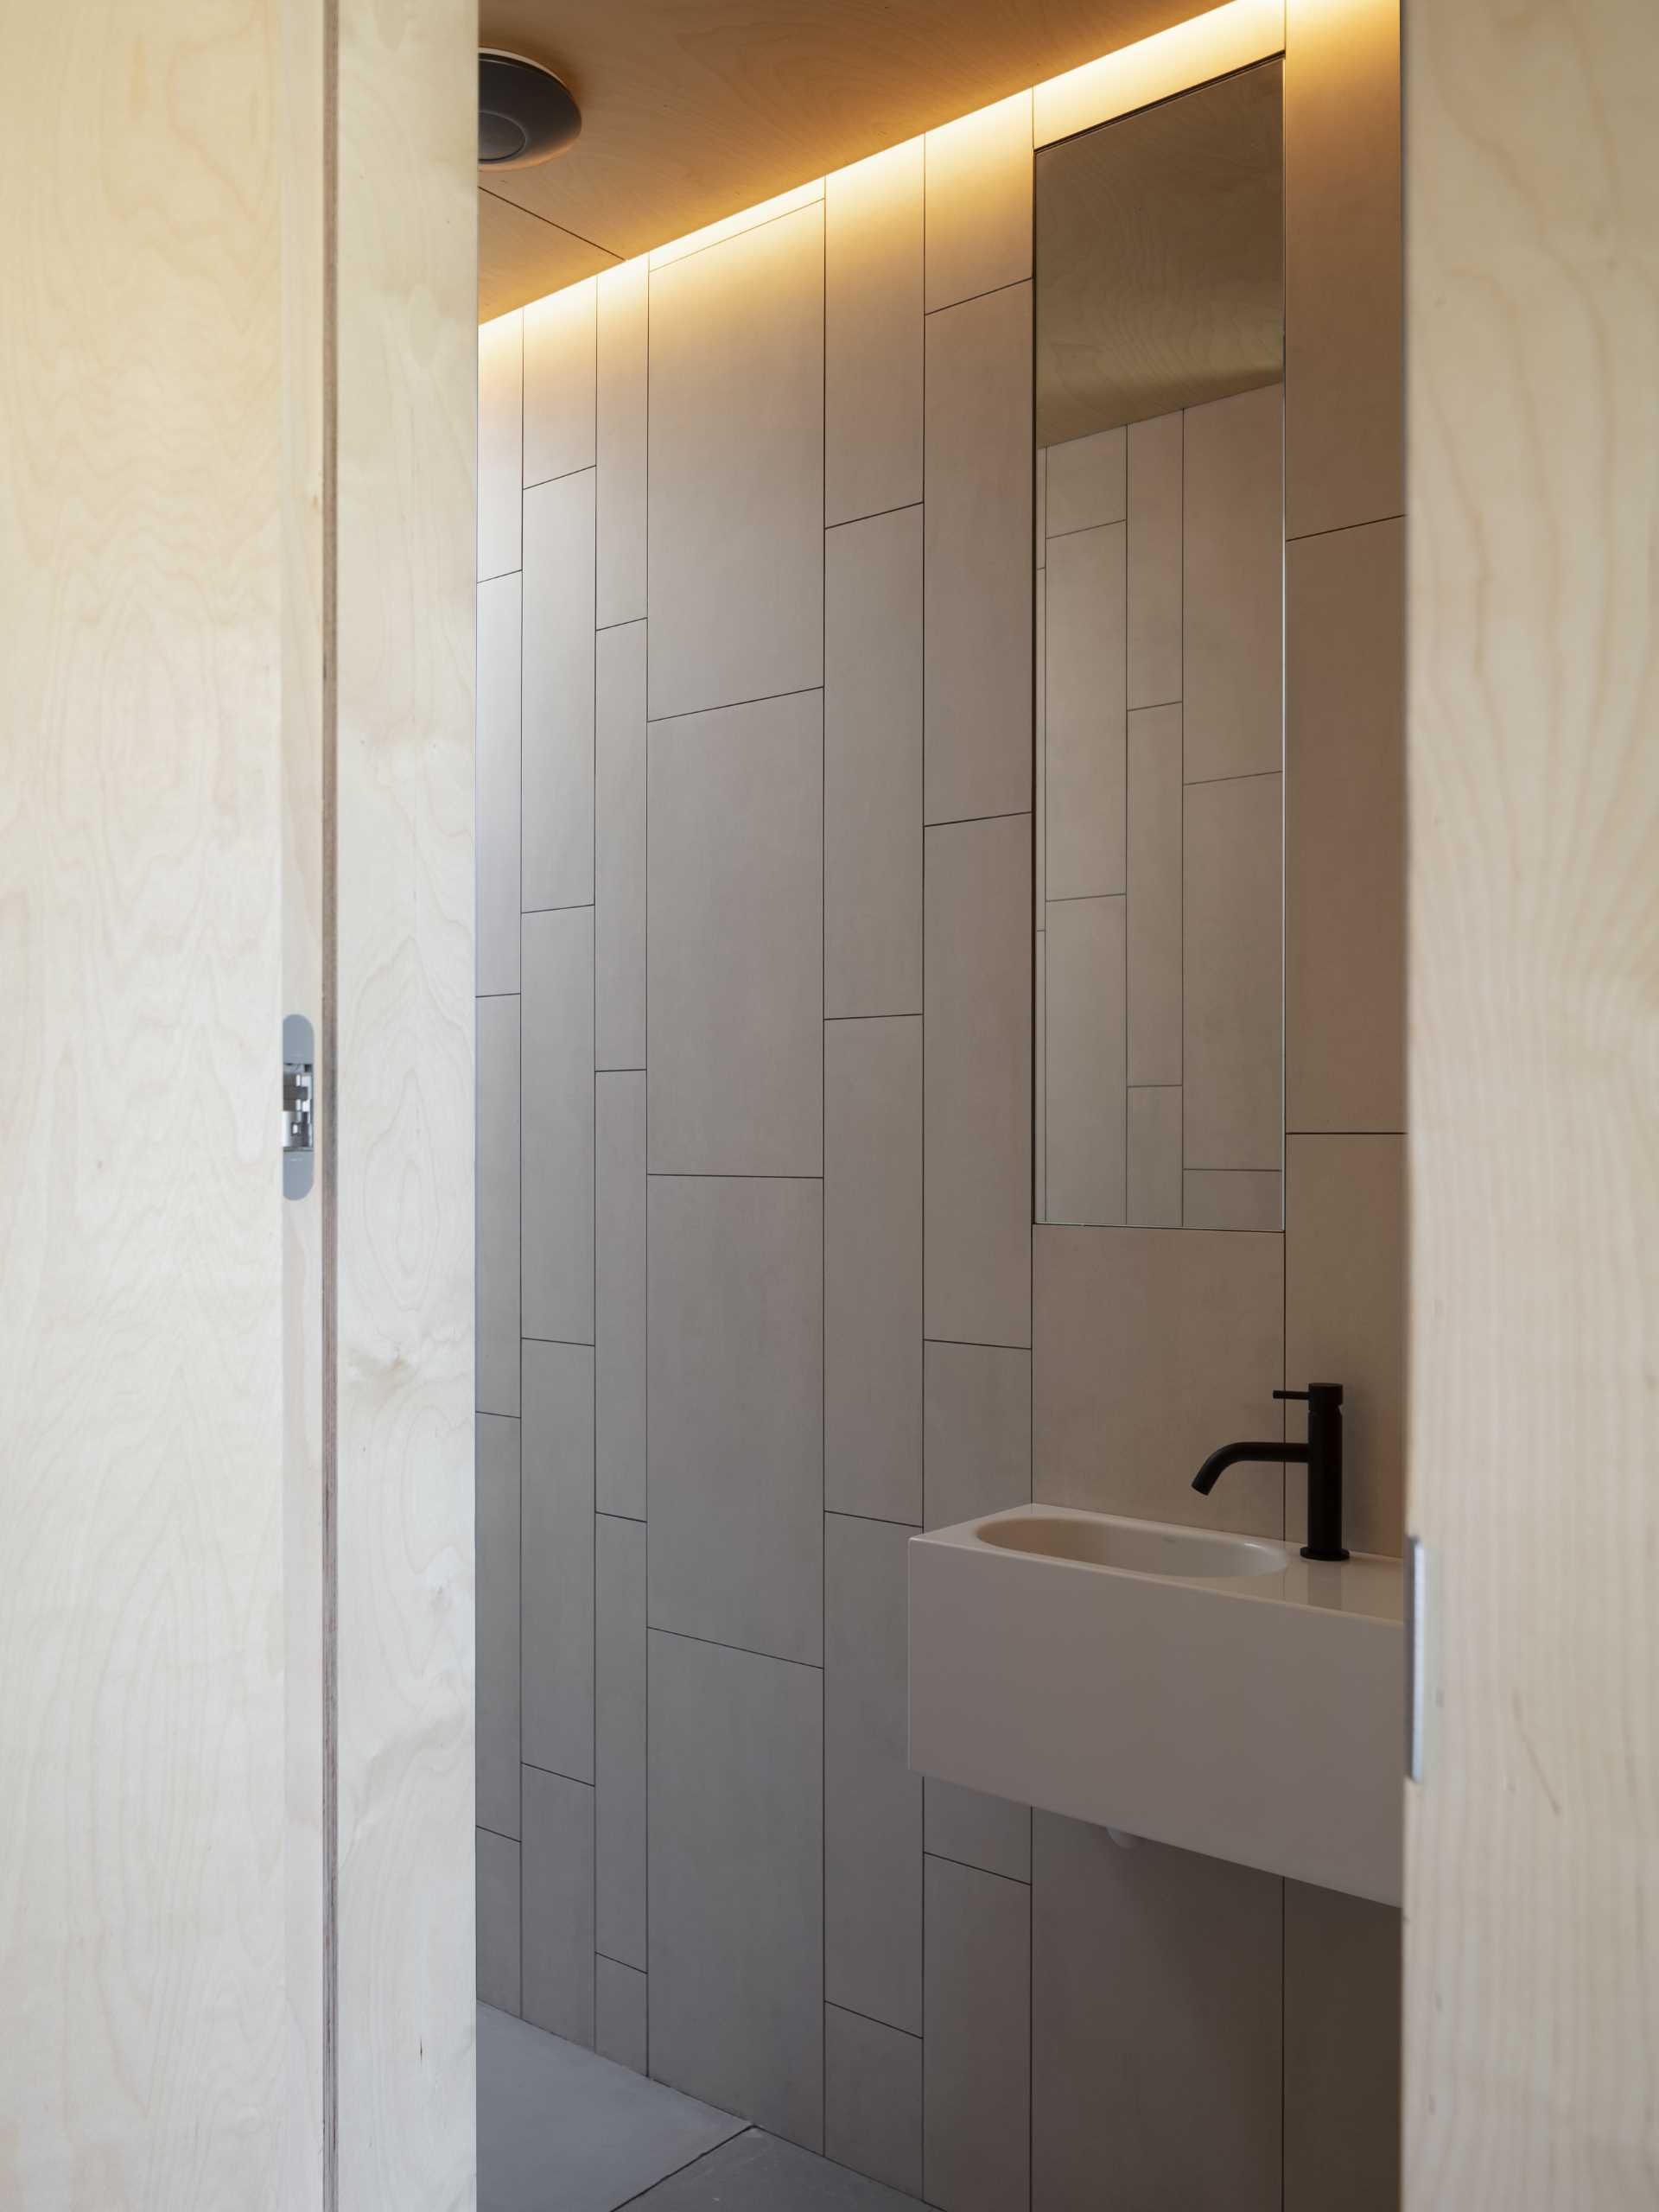 In this modern bathroom, the walls are lined with tiles, while a tall vertical mirror draws the eye upwards to the hidden lighting.